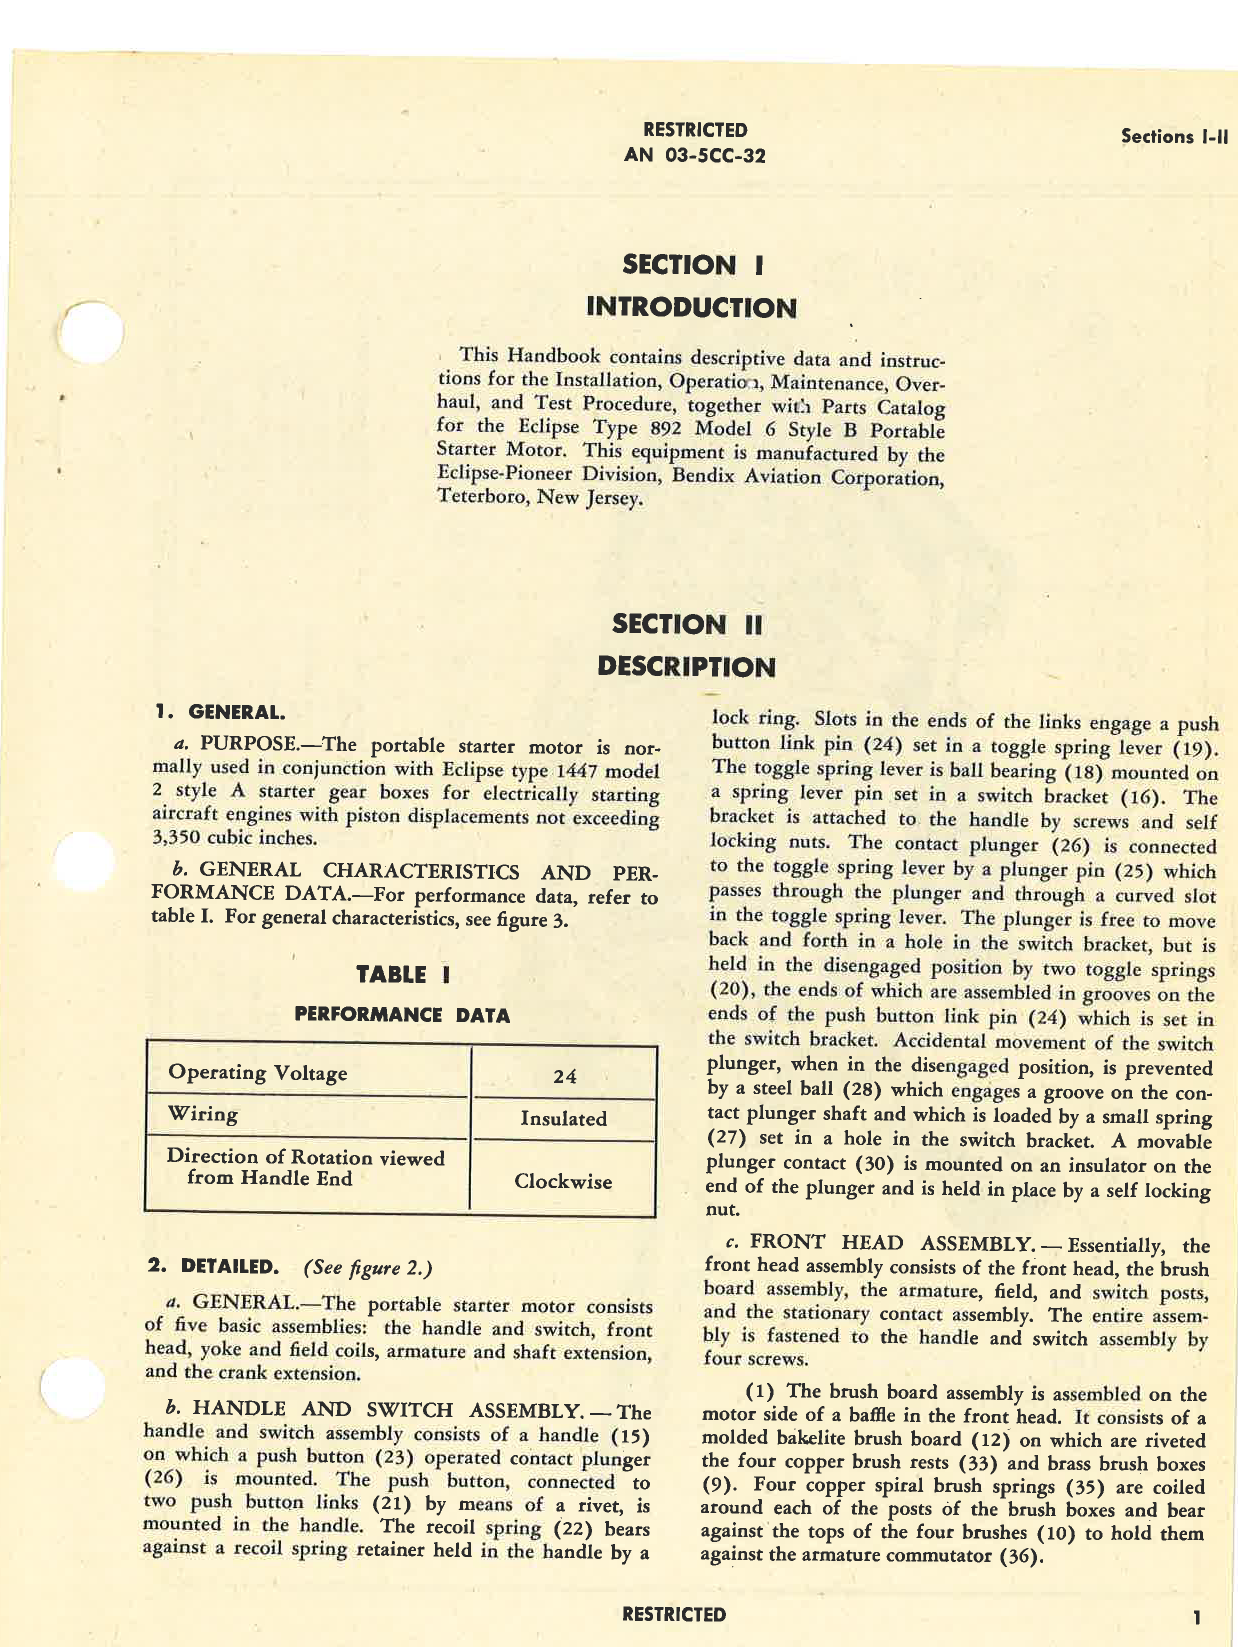 Sample page 5 from AirCorps Library document: Handbook of Instructions with Parts Catalog for Portable Starter Motor Type 892-6-B